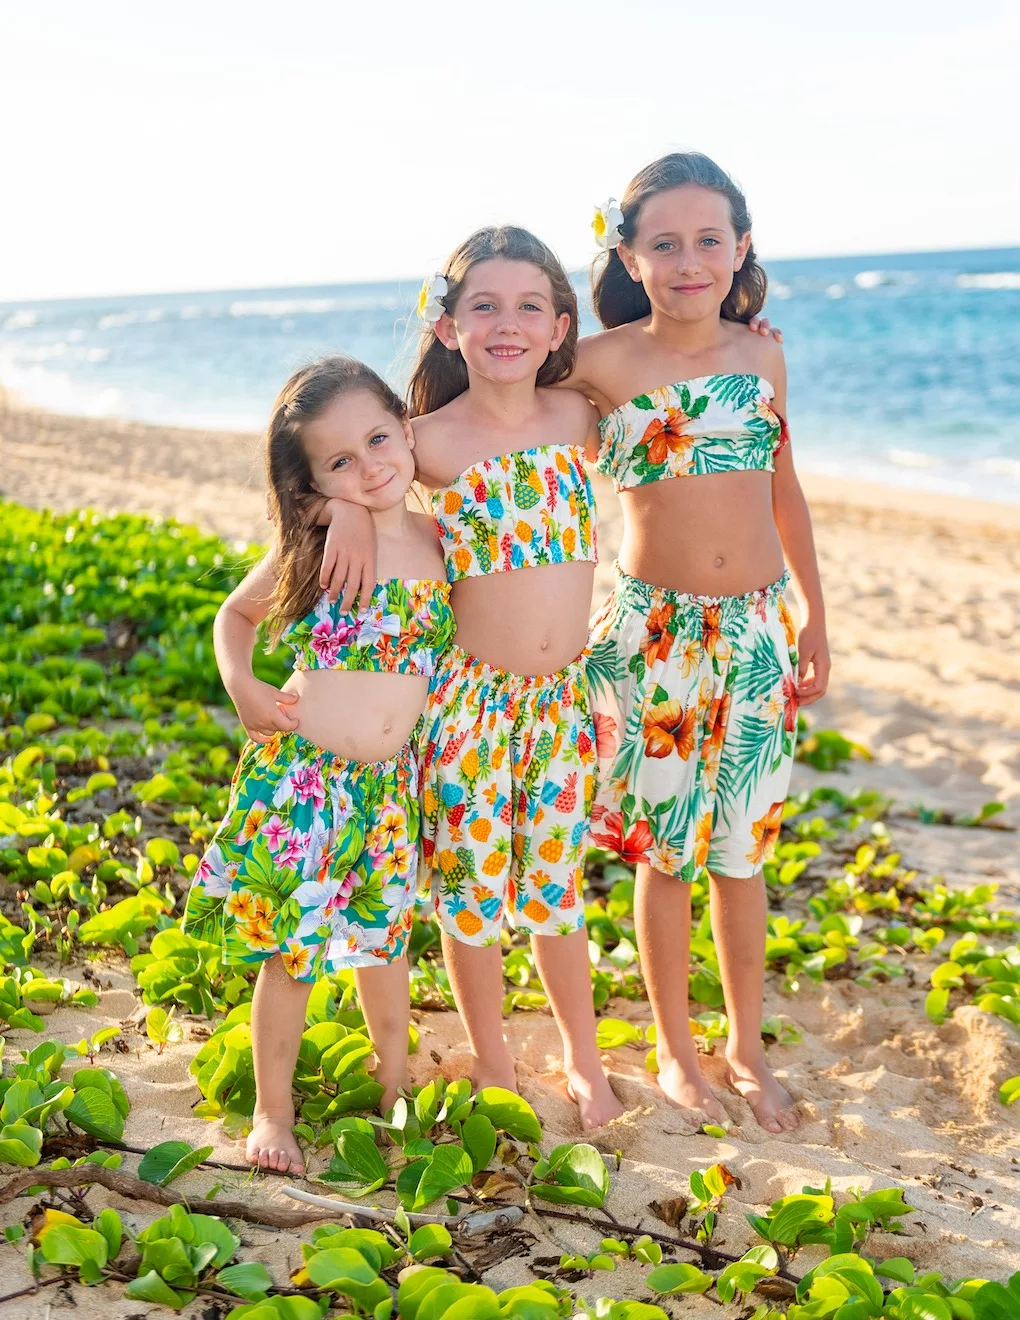 A photo of 3 siblings on a beach side by oahu hawaii photographer